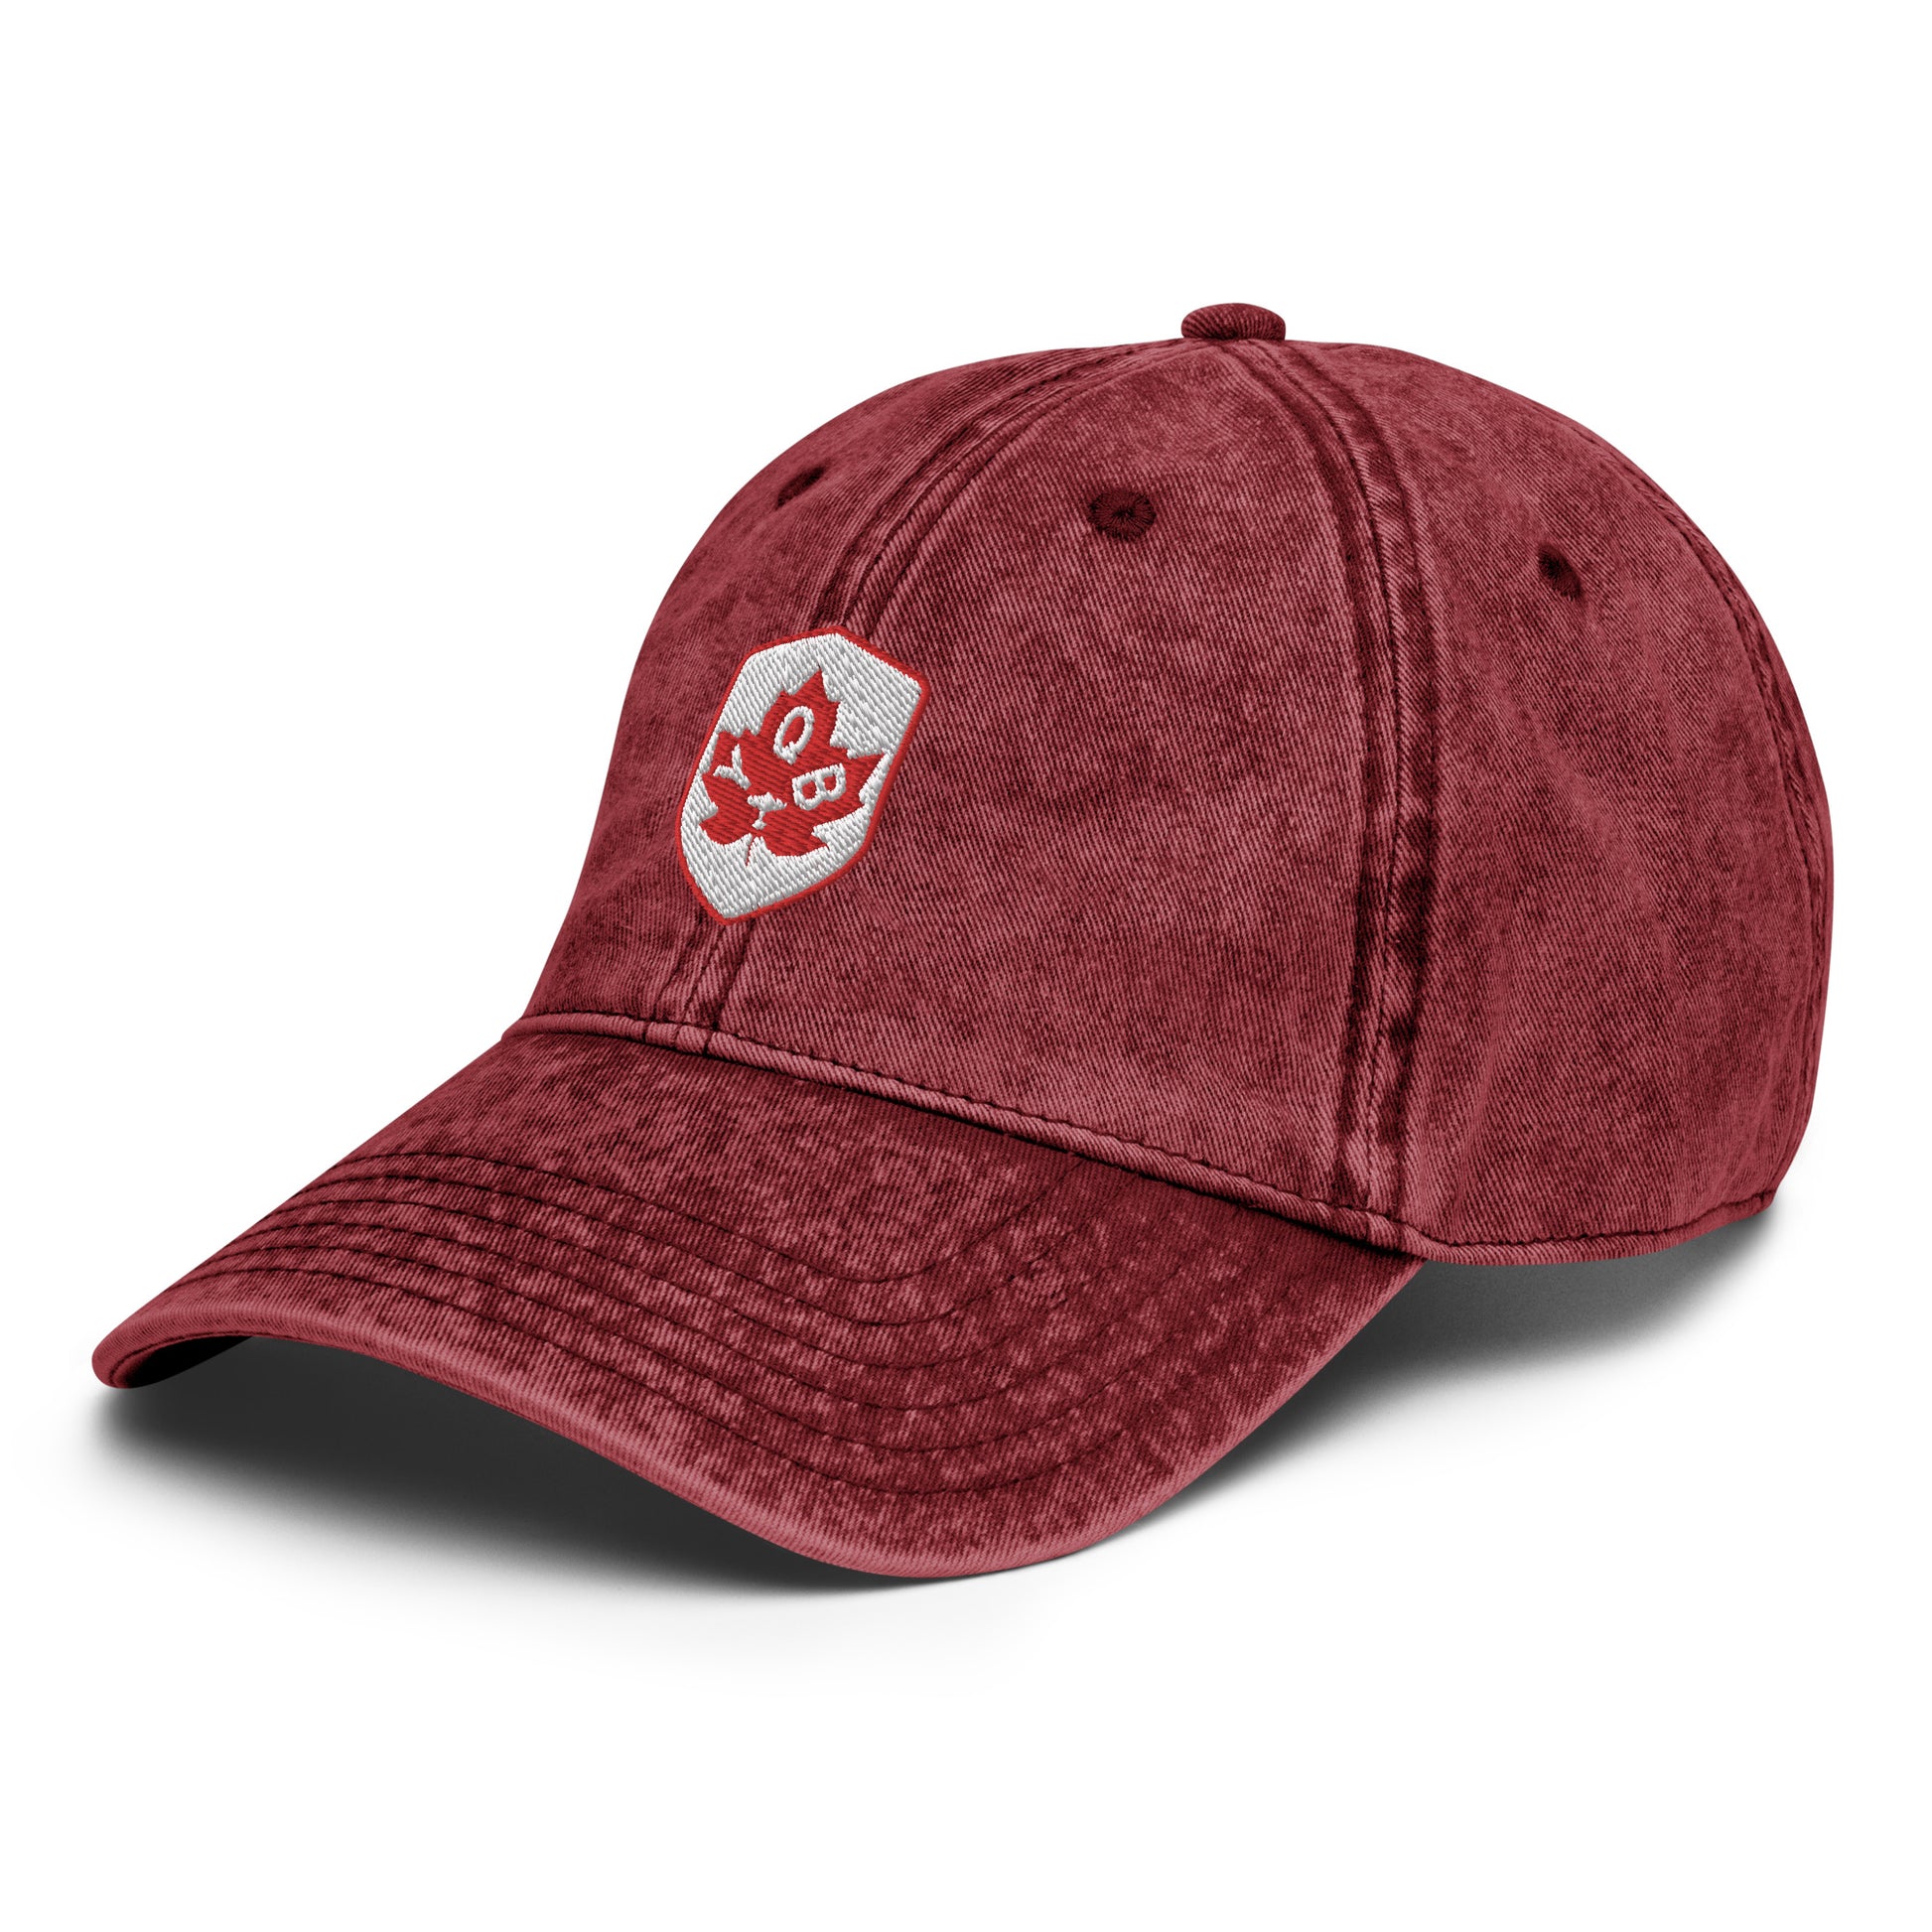 Maple Leaf Twill Cap - Red/White • YQB Quebec City • YHM Designs - Image 18